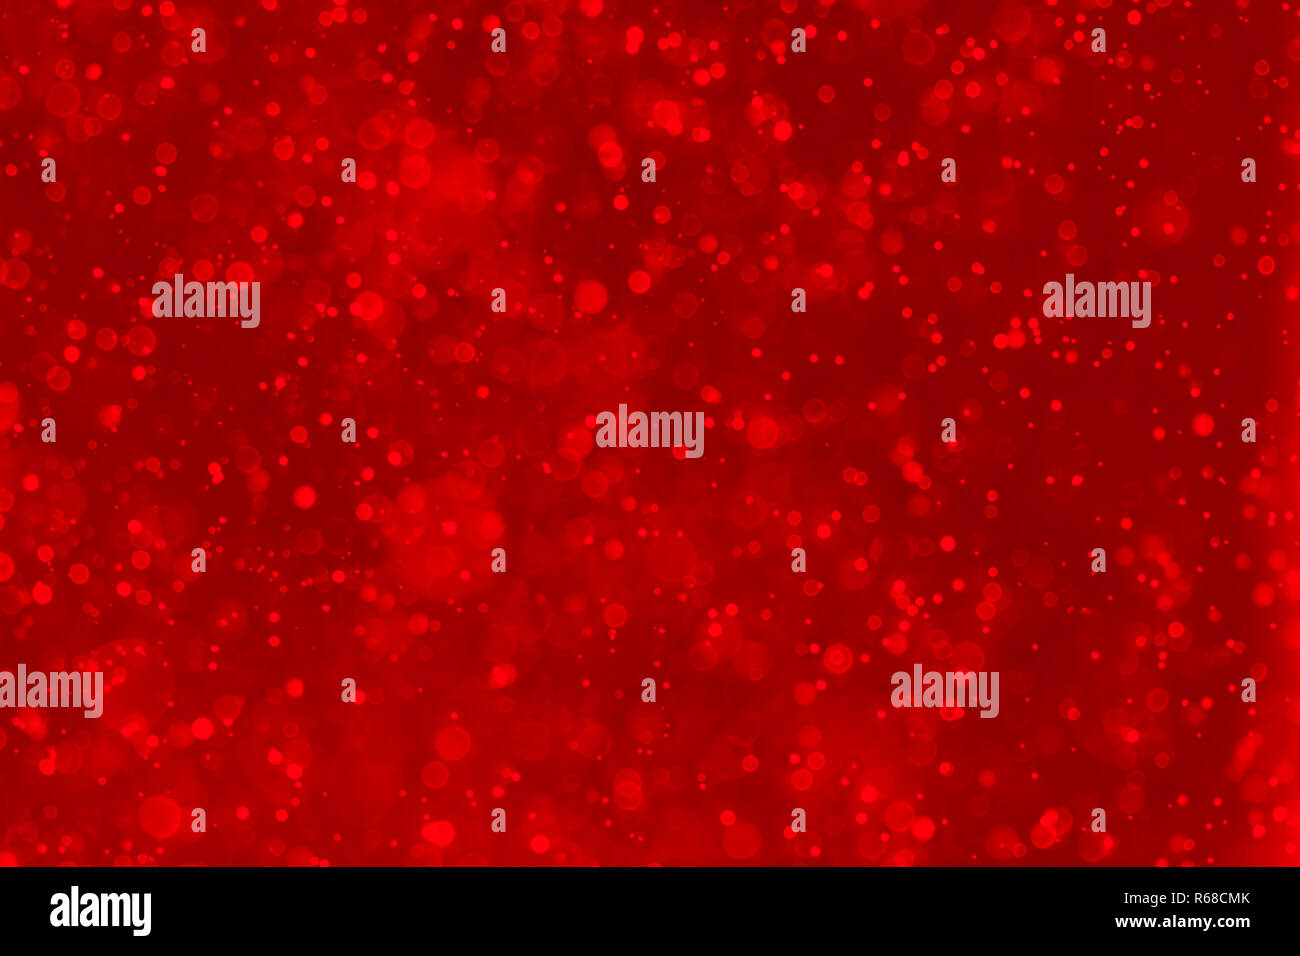 Red festive Christmas Elegant Abstract Background. Stock Photo